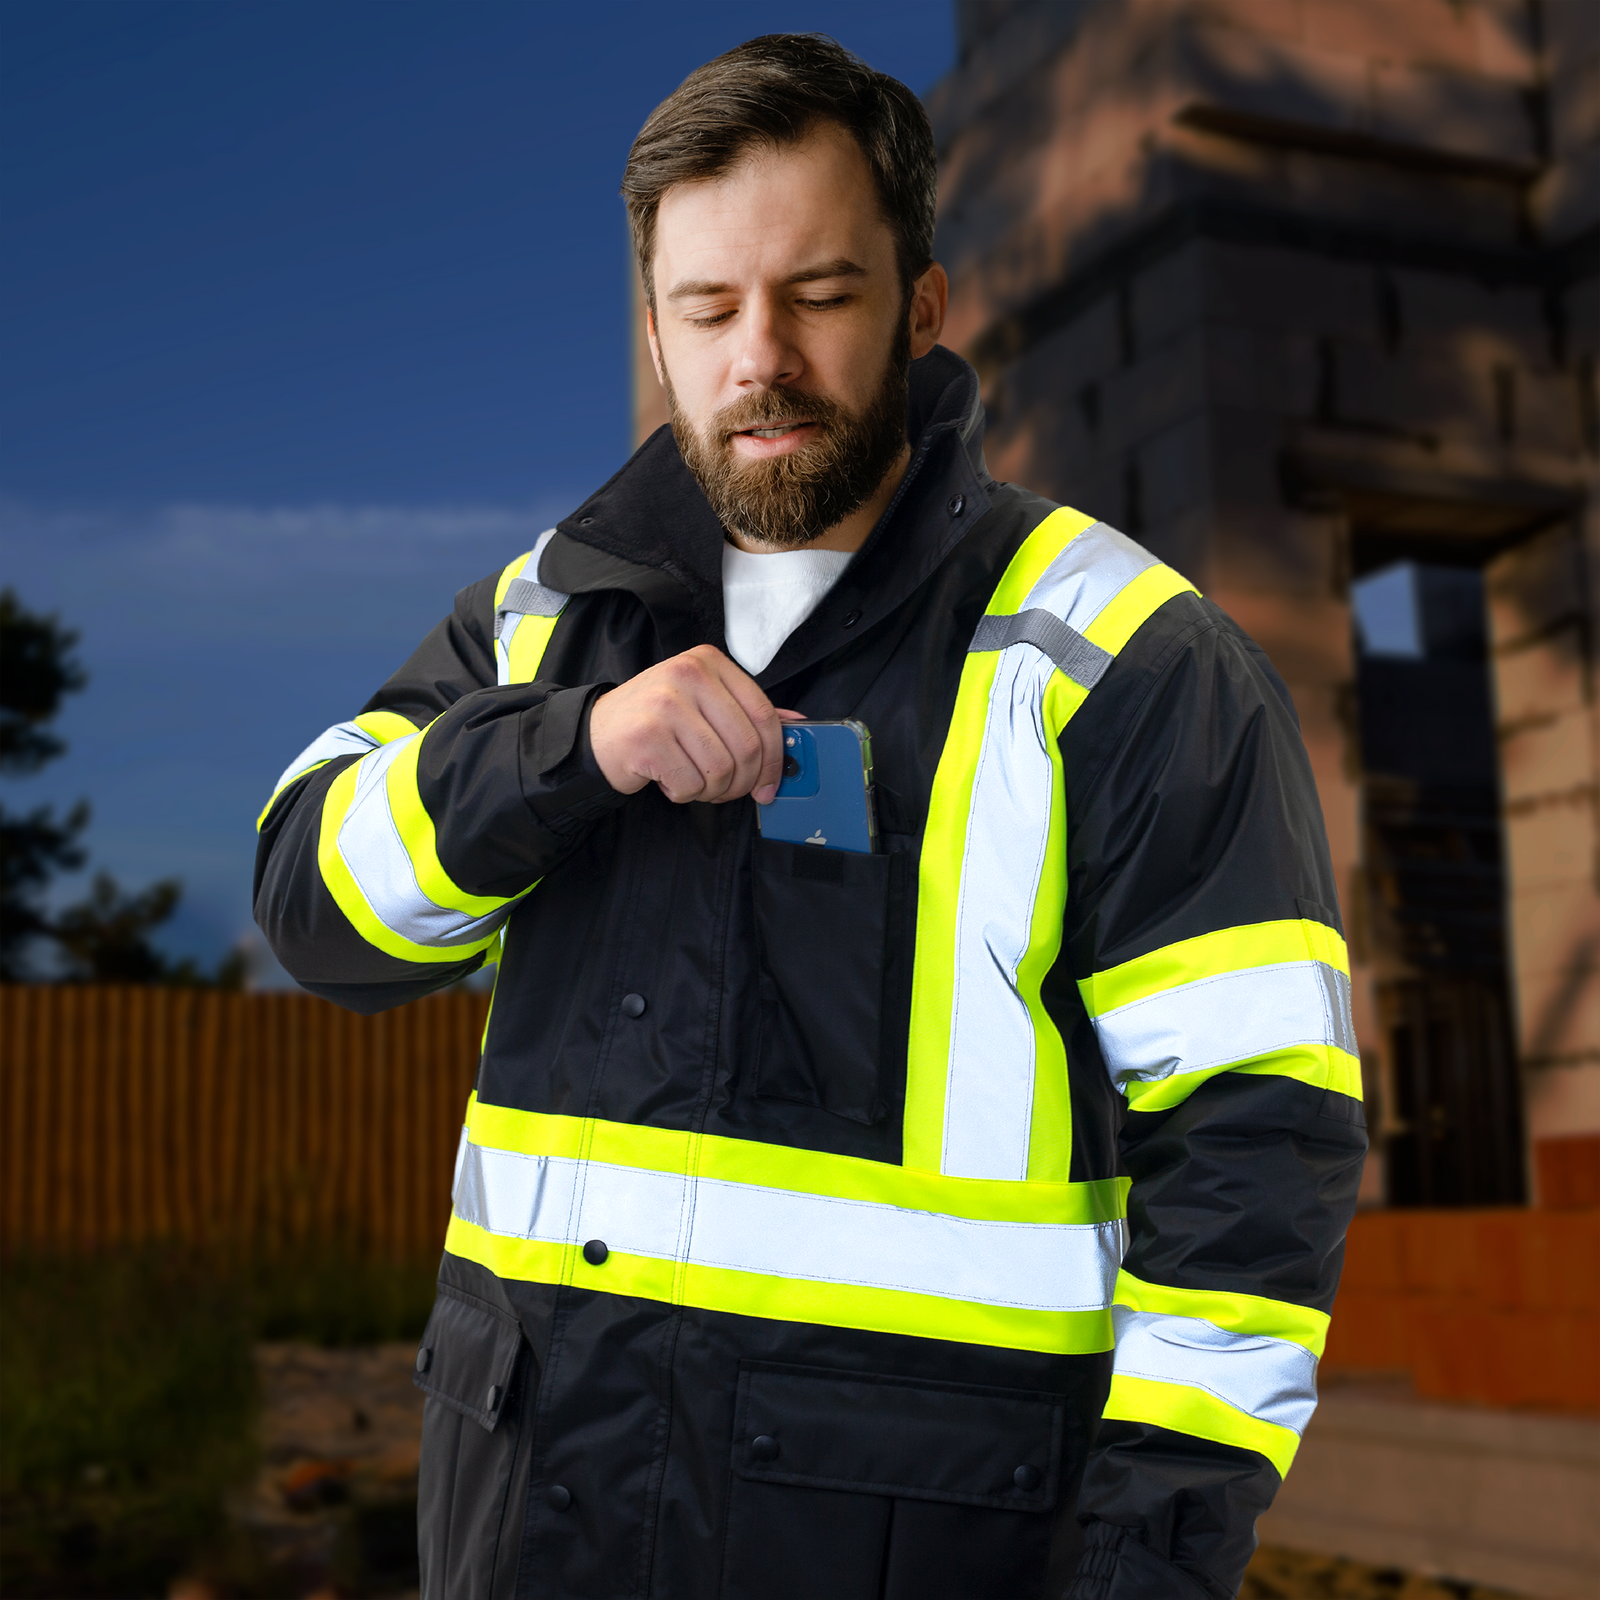 Worker wearing the insulated black high visibility jacket with reflective and yellow stripes